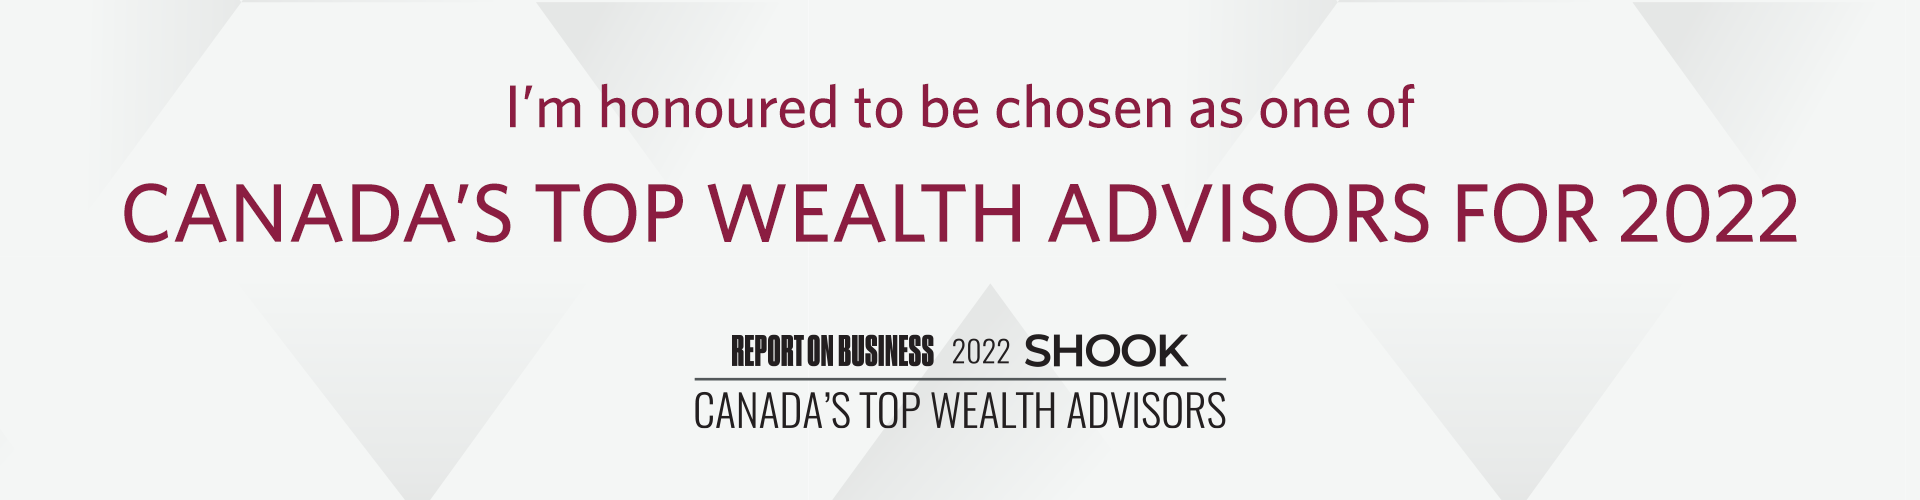 I am honoured to be chosen as one of Canada’s Top Wealth Advisor for 2022 by The Globe and Mail and SHOOK Research ranking